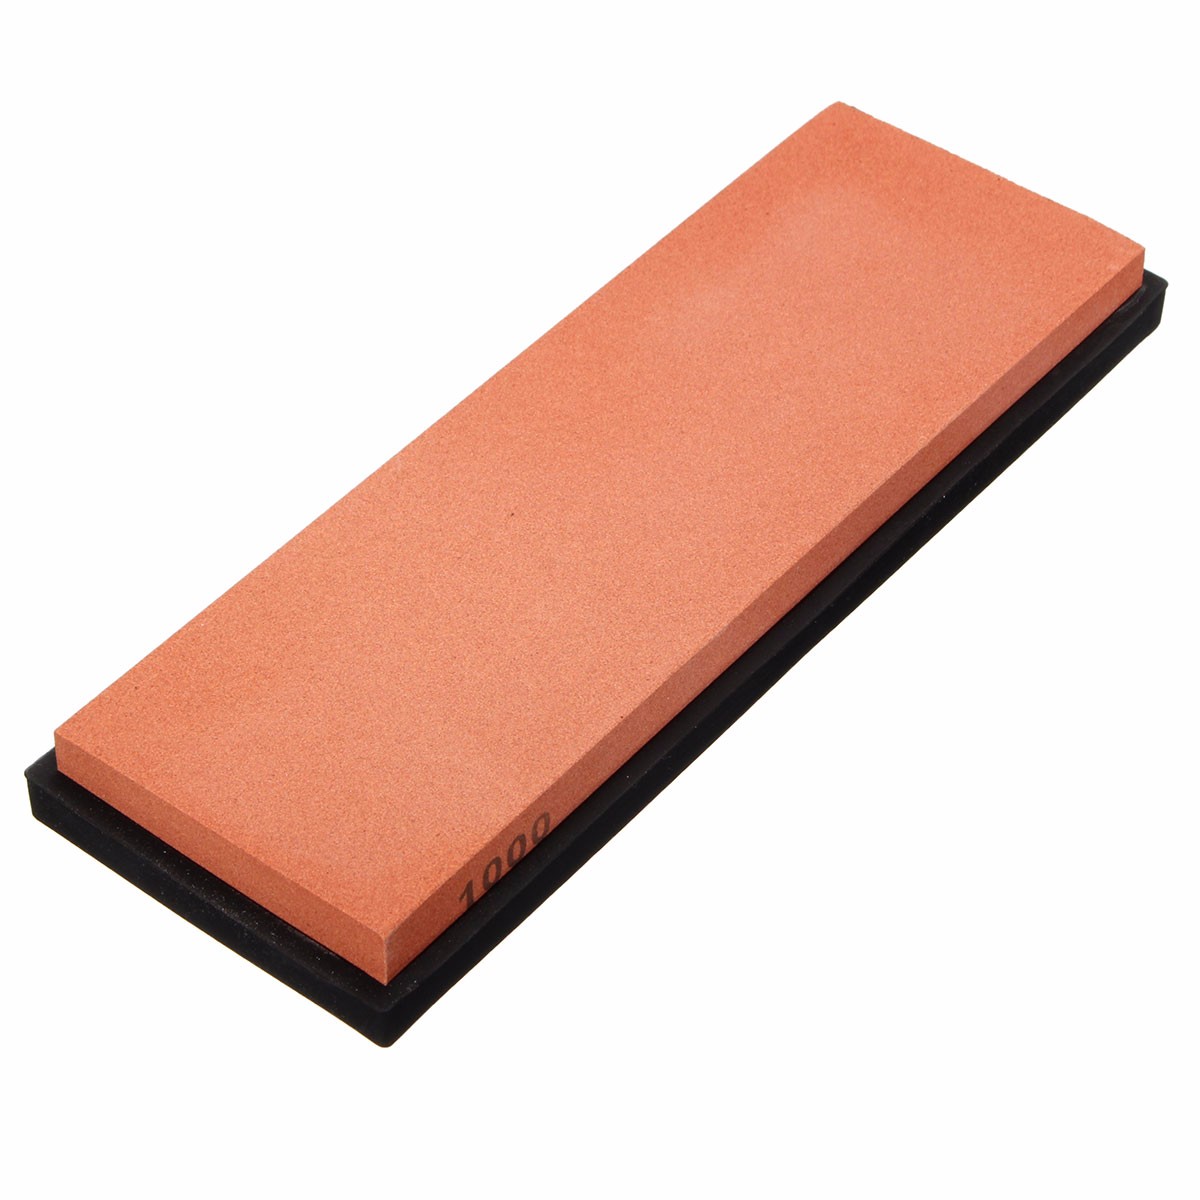 1000-Grit-Whetstone-Sharpener-Sharpen-Stone-With-Stand-180mm-x-60mm-x-15mm-1324622-9